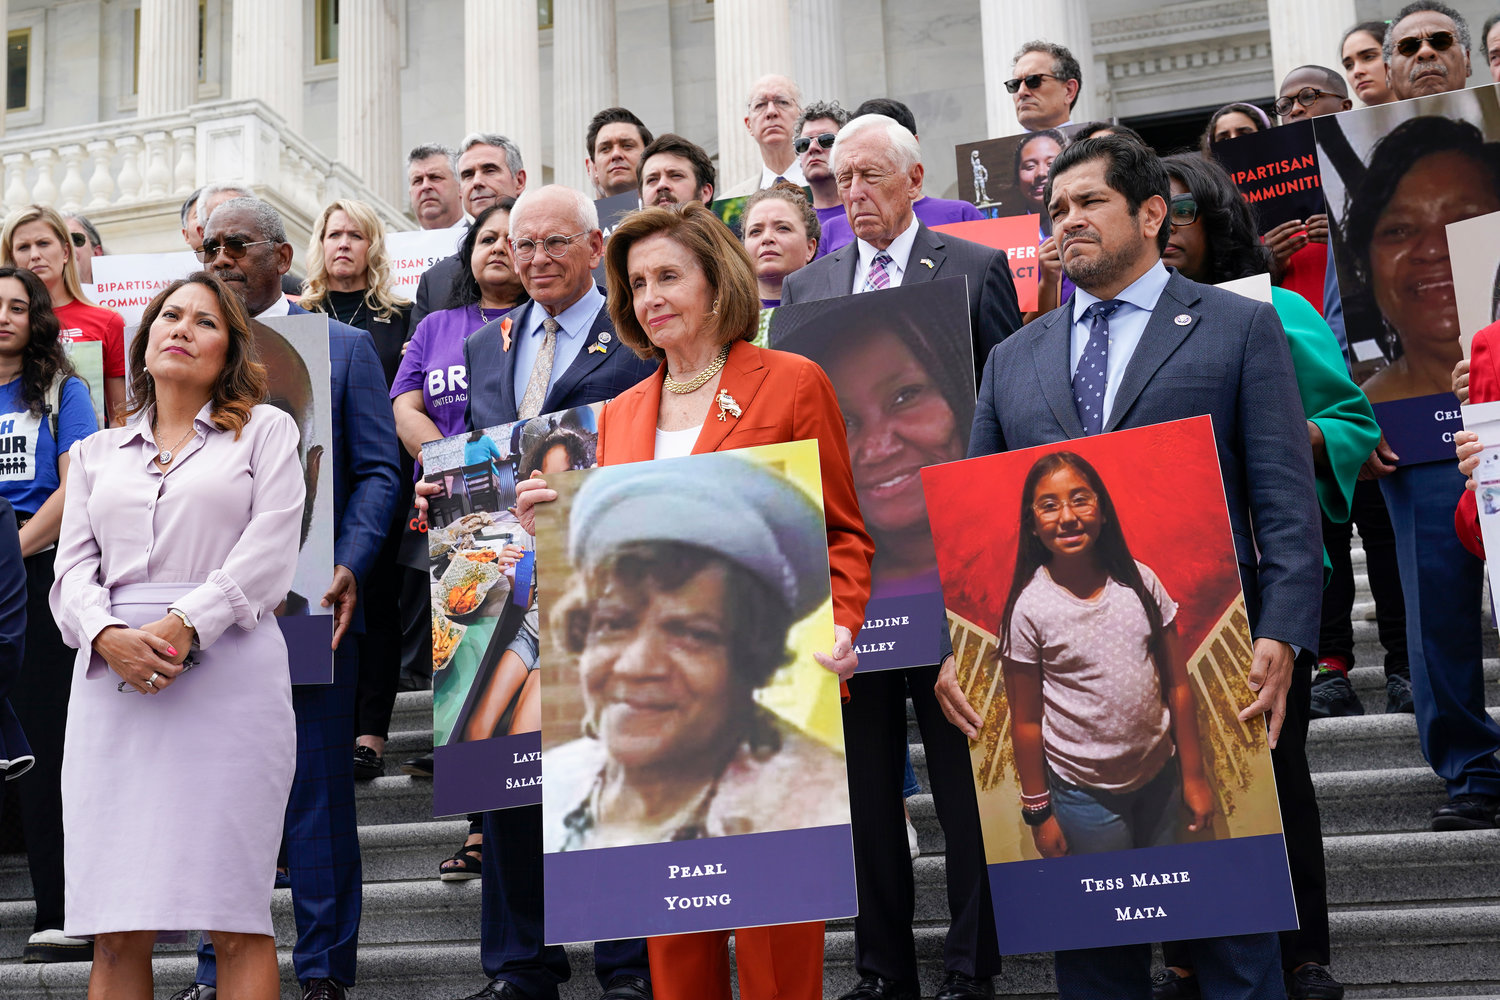 From left, Rep. Veronica Escobar, D-Texas, House Speaker Nancy Pelosi of Calif., and Rep. Jimmy Gomez, D-Calif., listen as they attend an event on the steps of the U.S. Capitol about gun violence Friday, June 24, 2022. (AP Photo/J. Scott Applewhite)